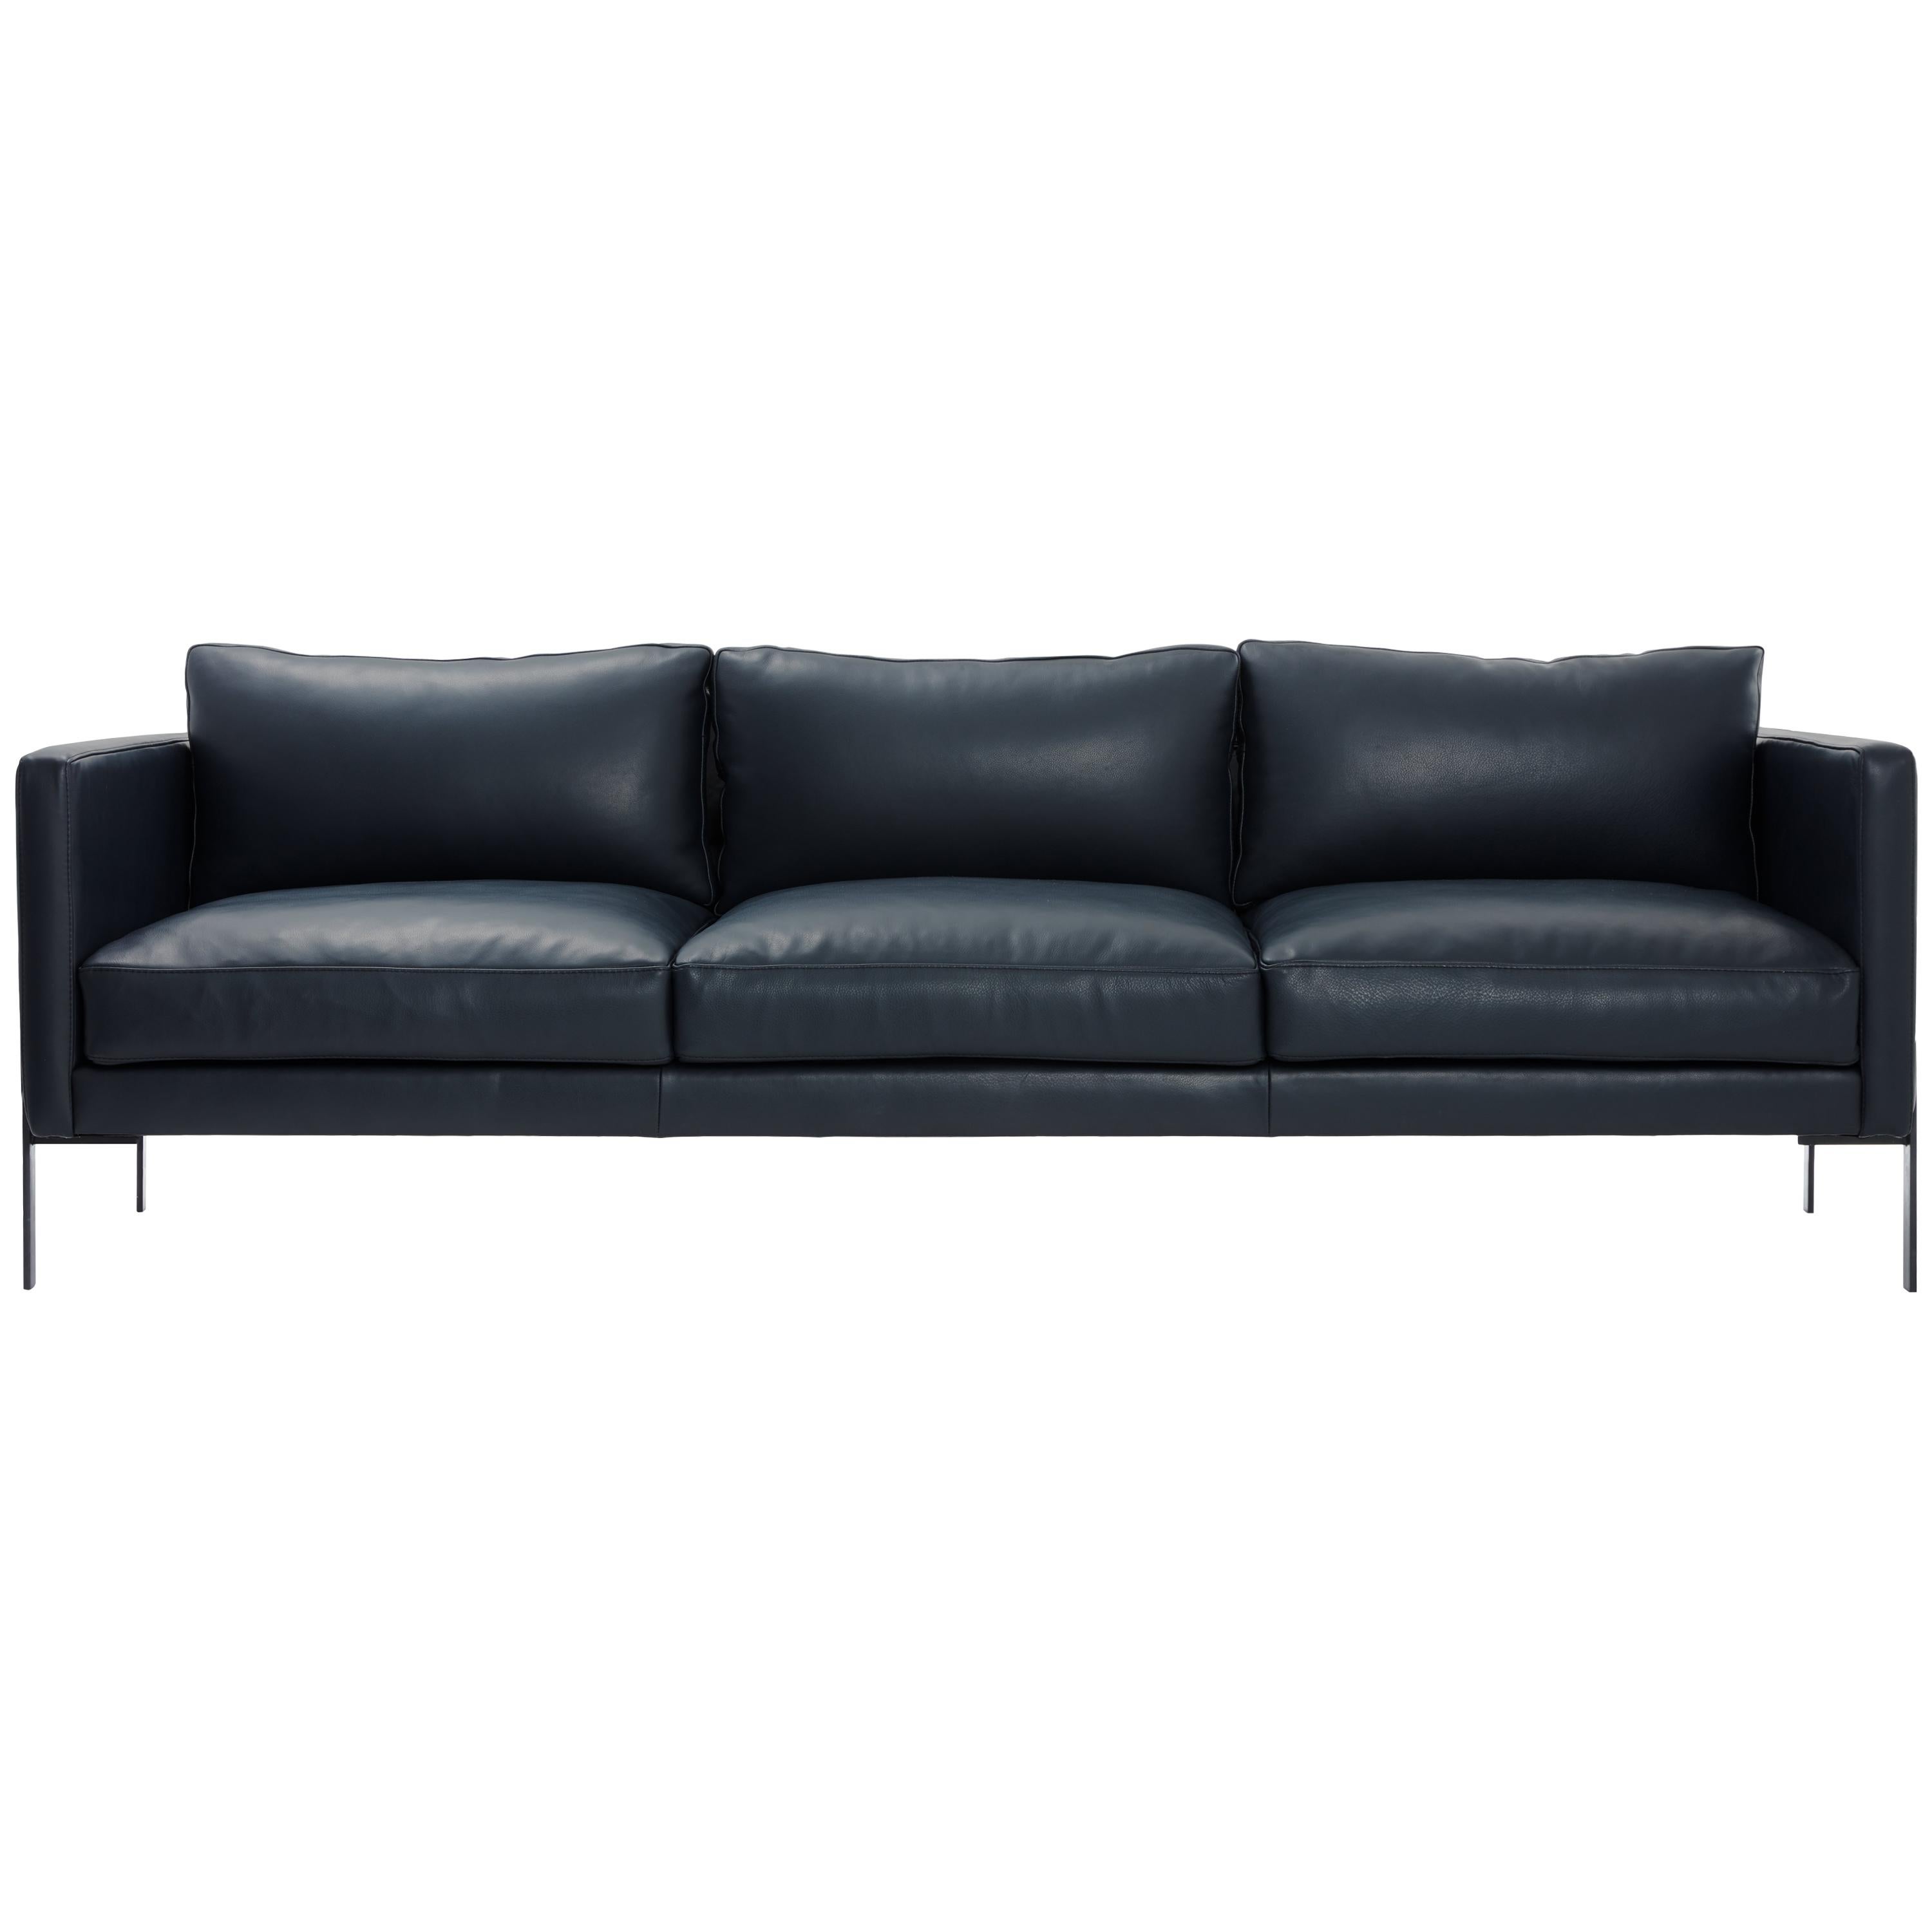 Truss Sofa in Midnight Leather and Powder-Coated Steel by TRNK For Sale